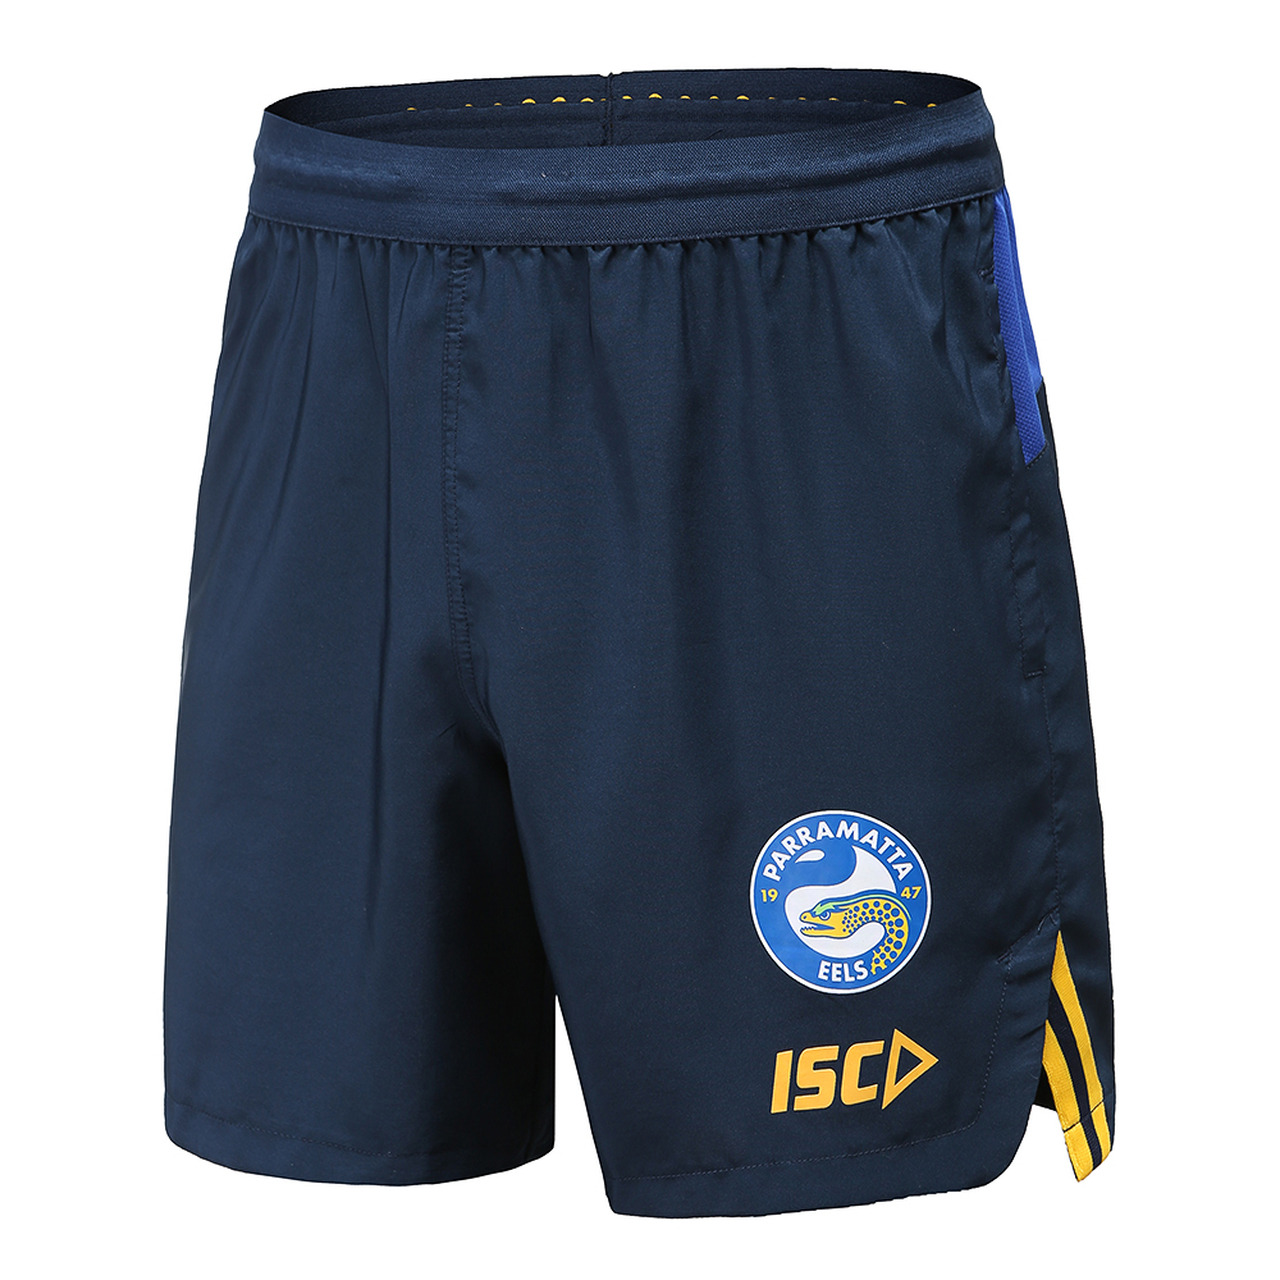 Details about   Parramatta Eels NRL ISC Players Navy Training Shorts Sizes S-5XL T8 